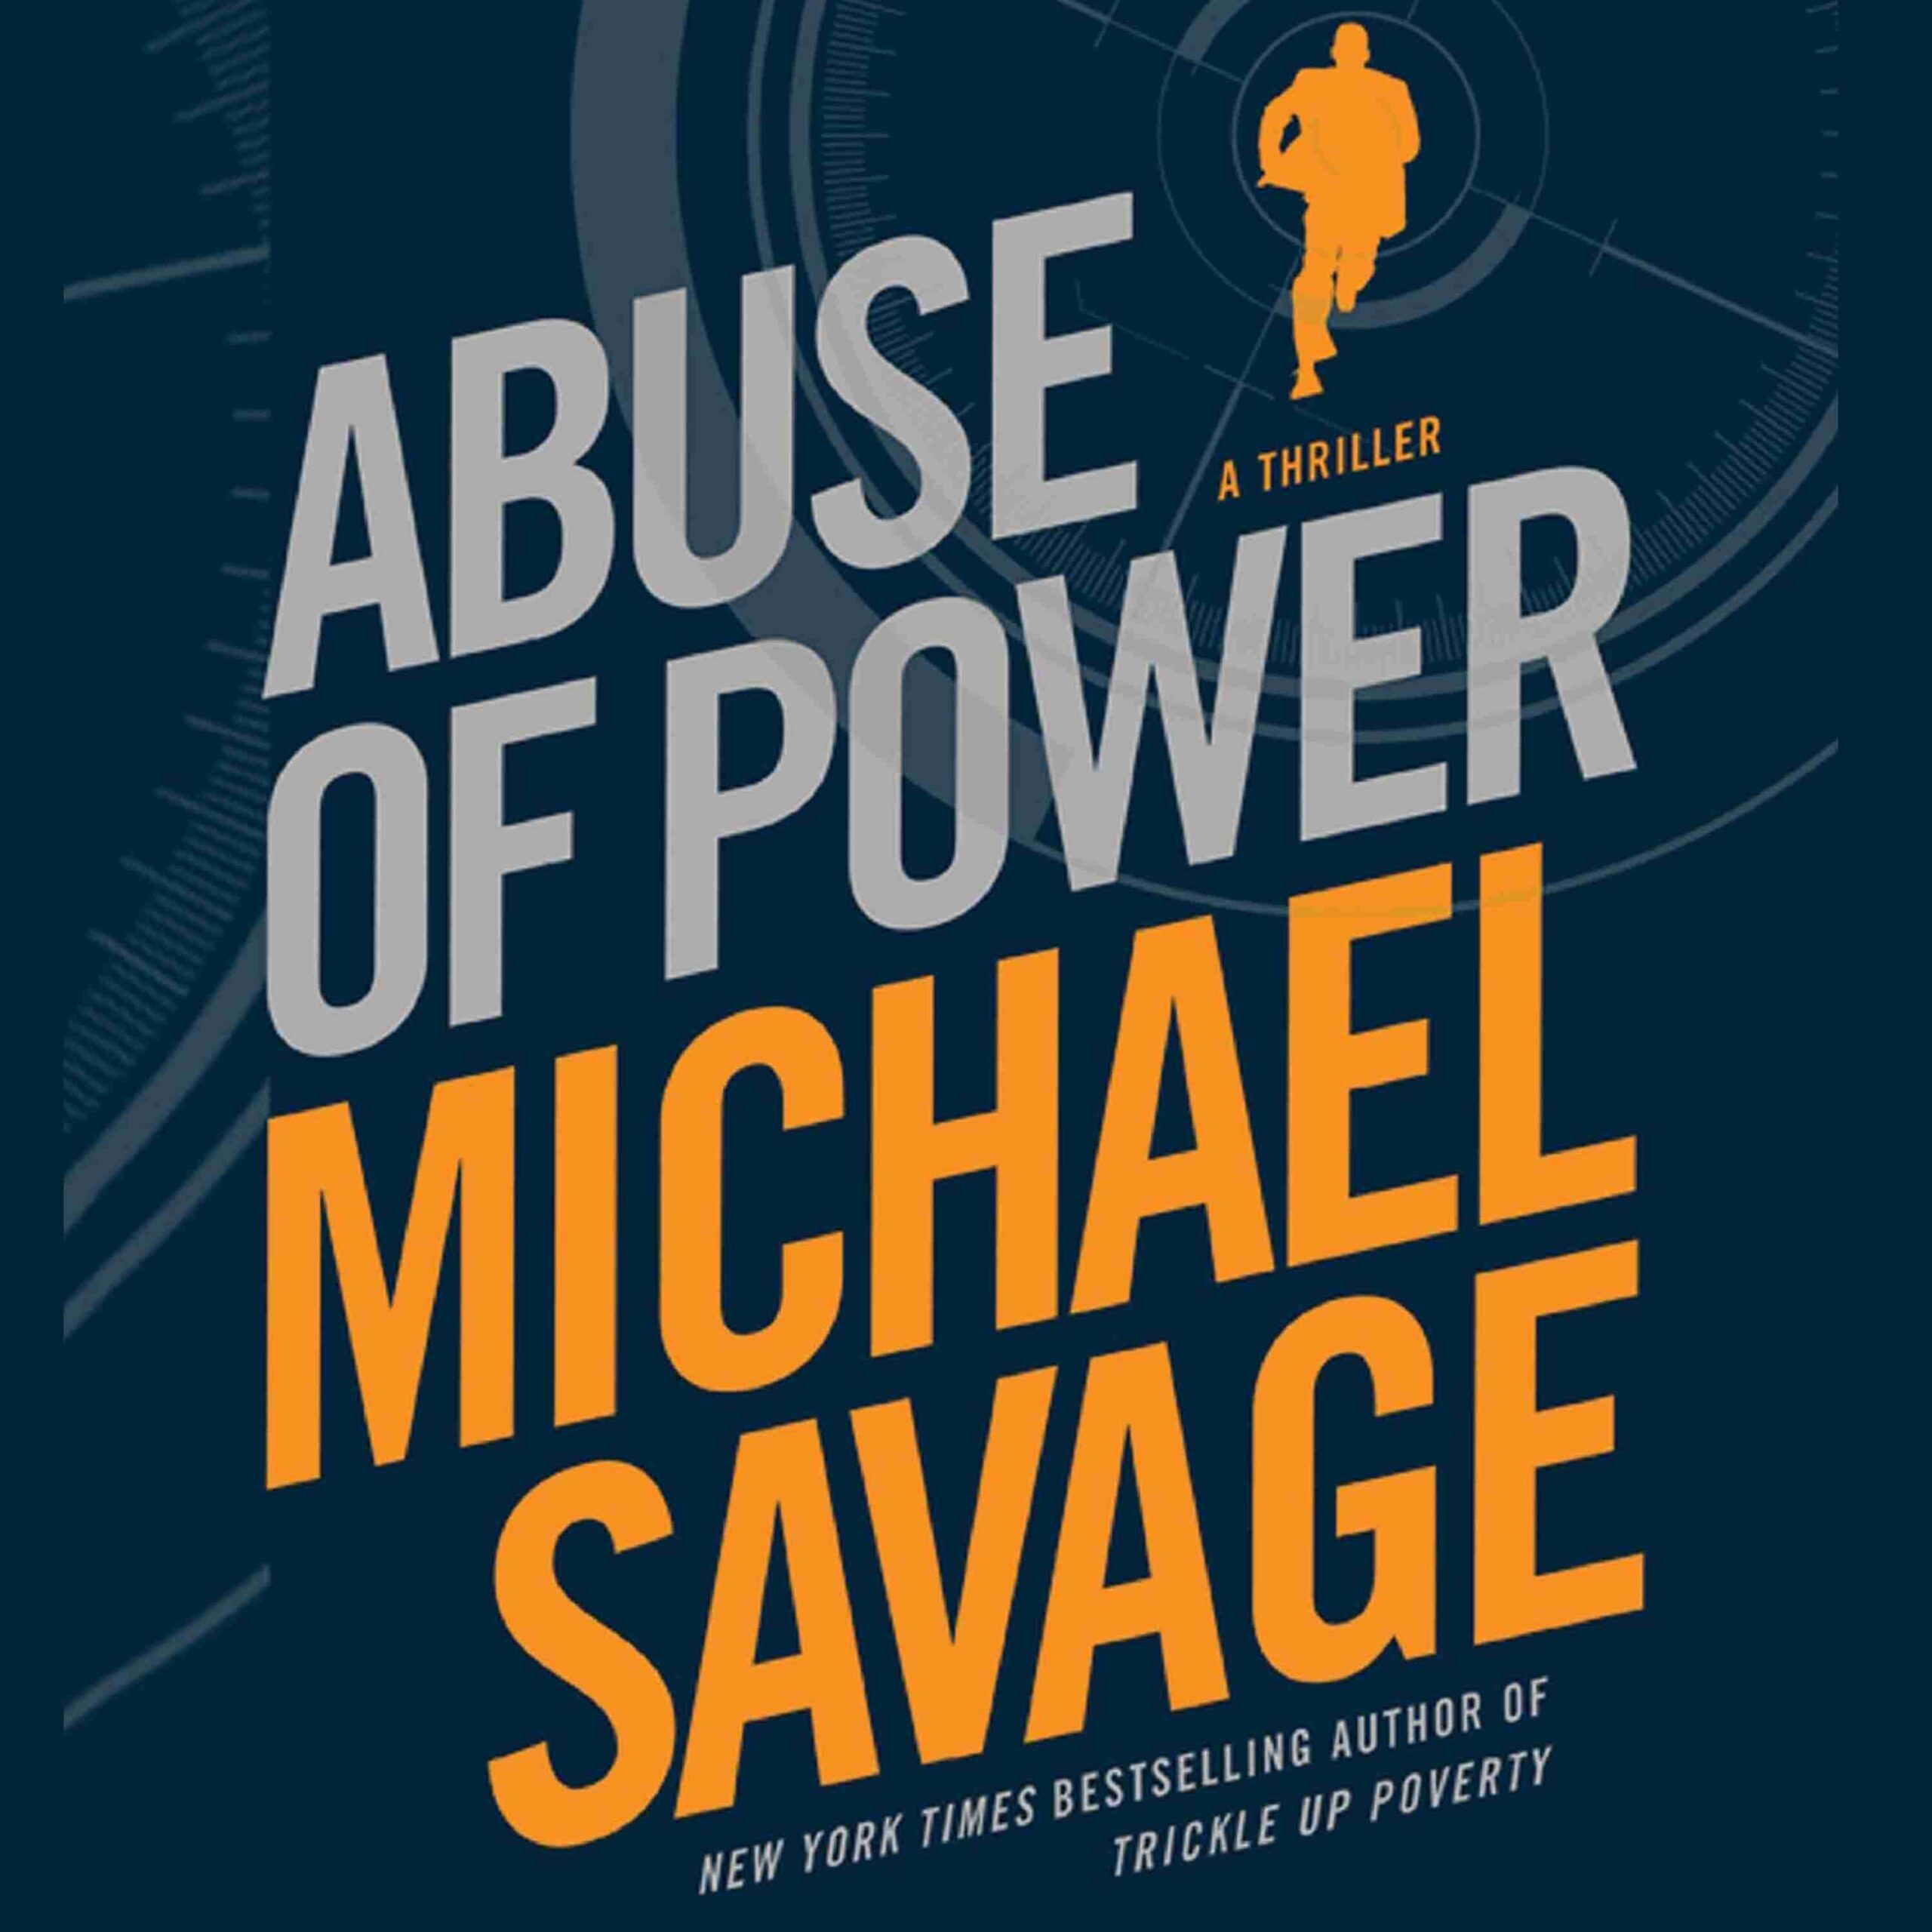 Abuse of Power byMichael Savage Audiobook. 26.99 USD